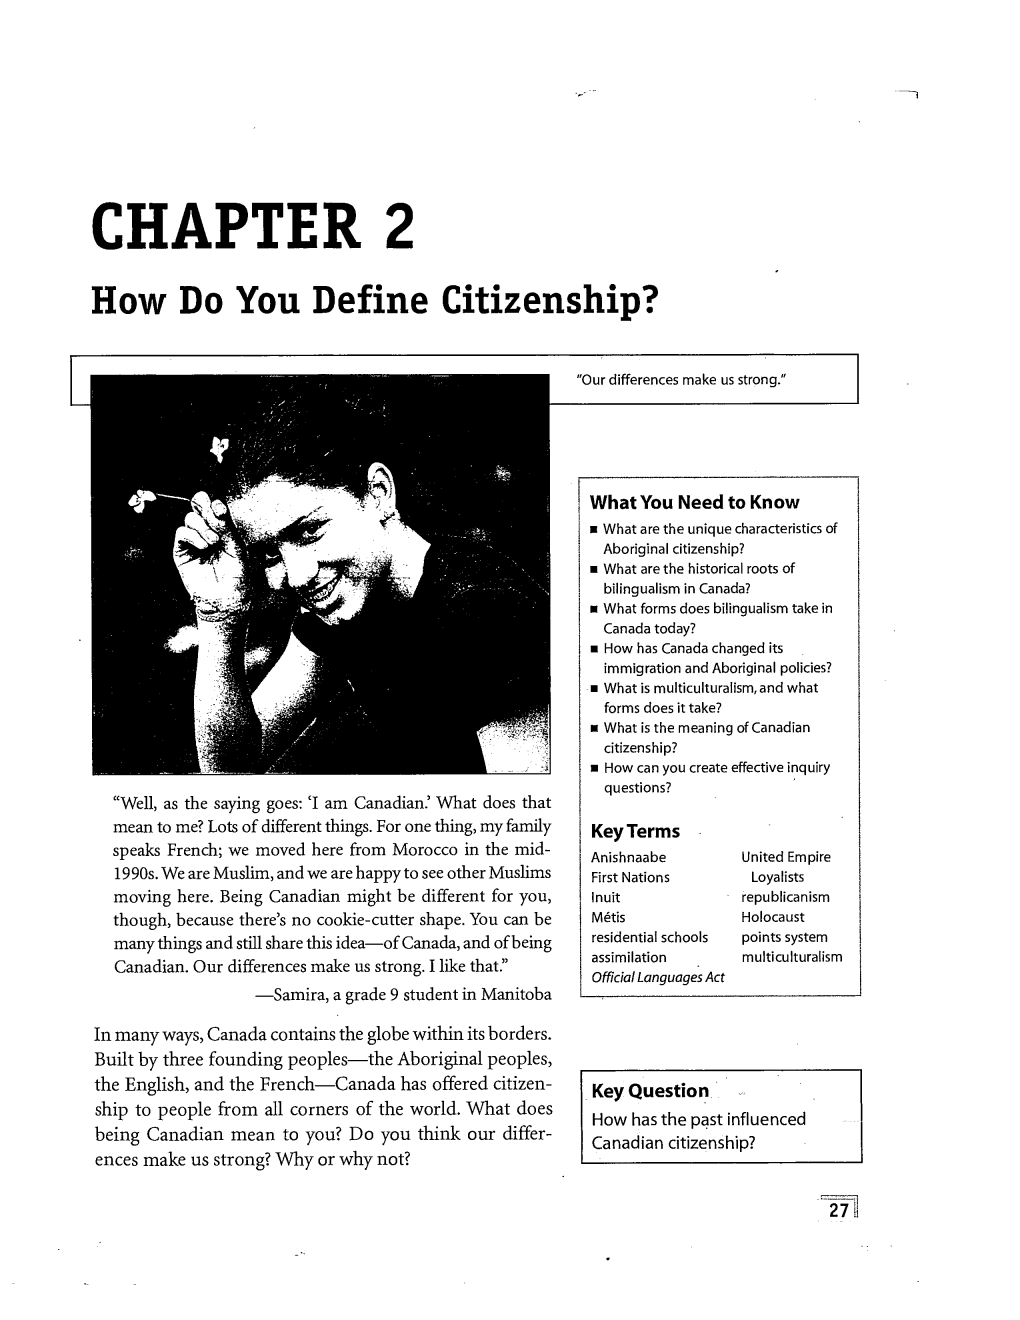 CHAPTER 2 How Do You Define Citizenship?